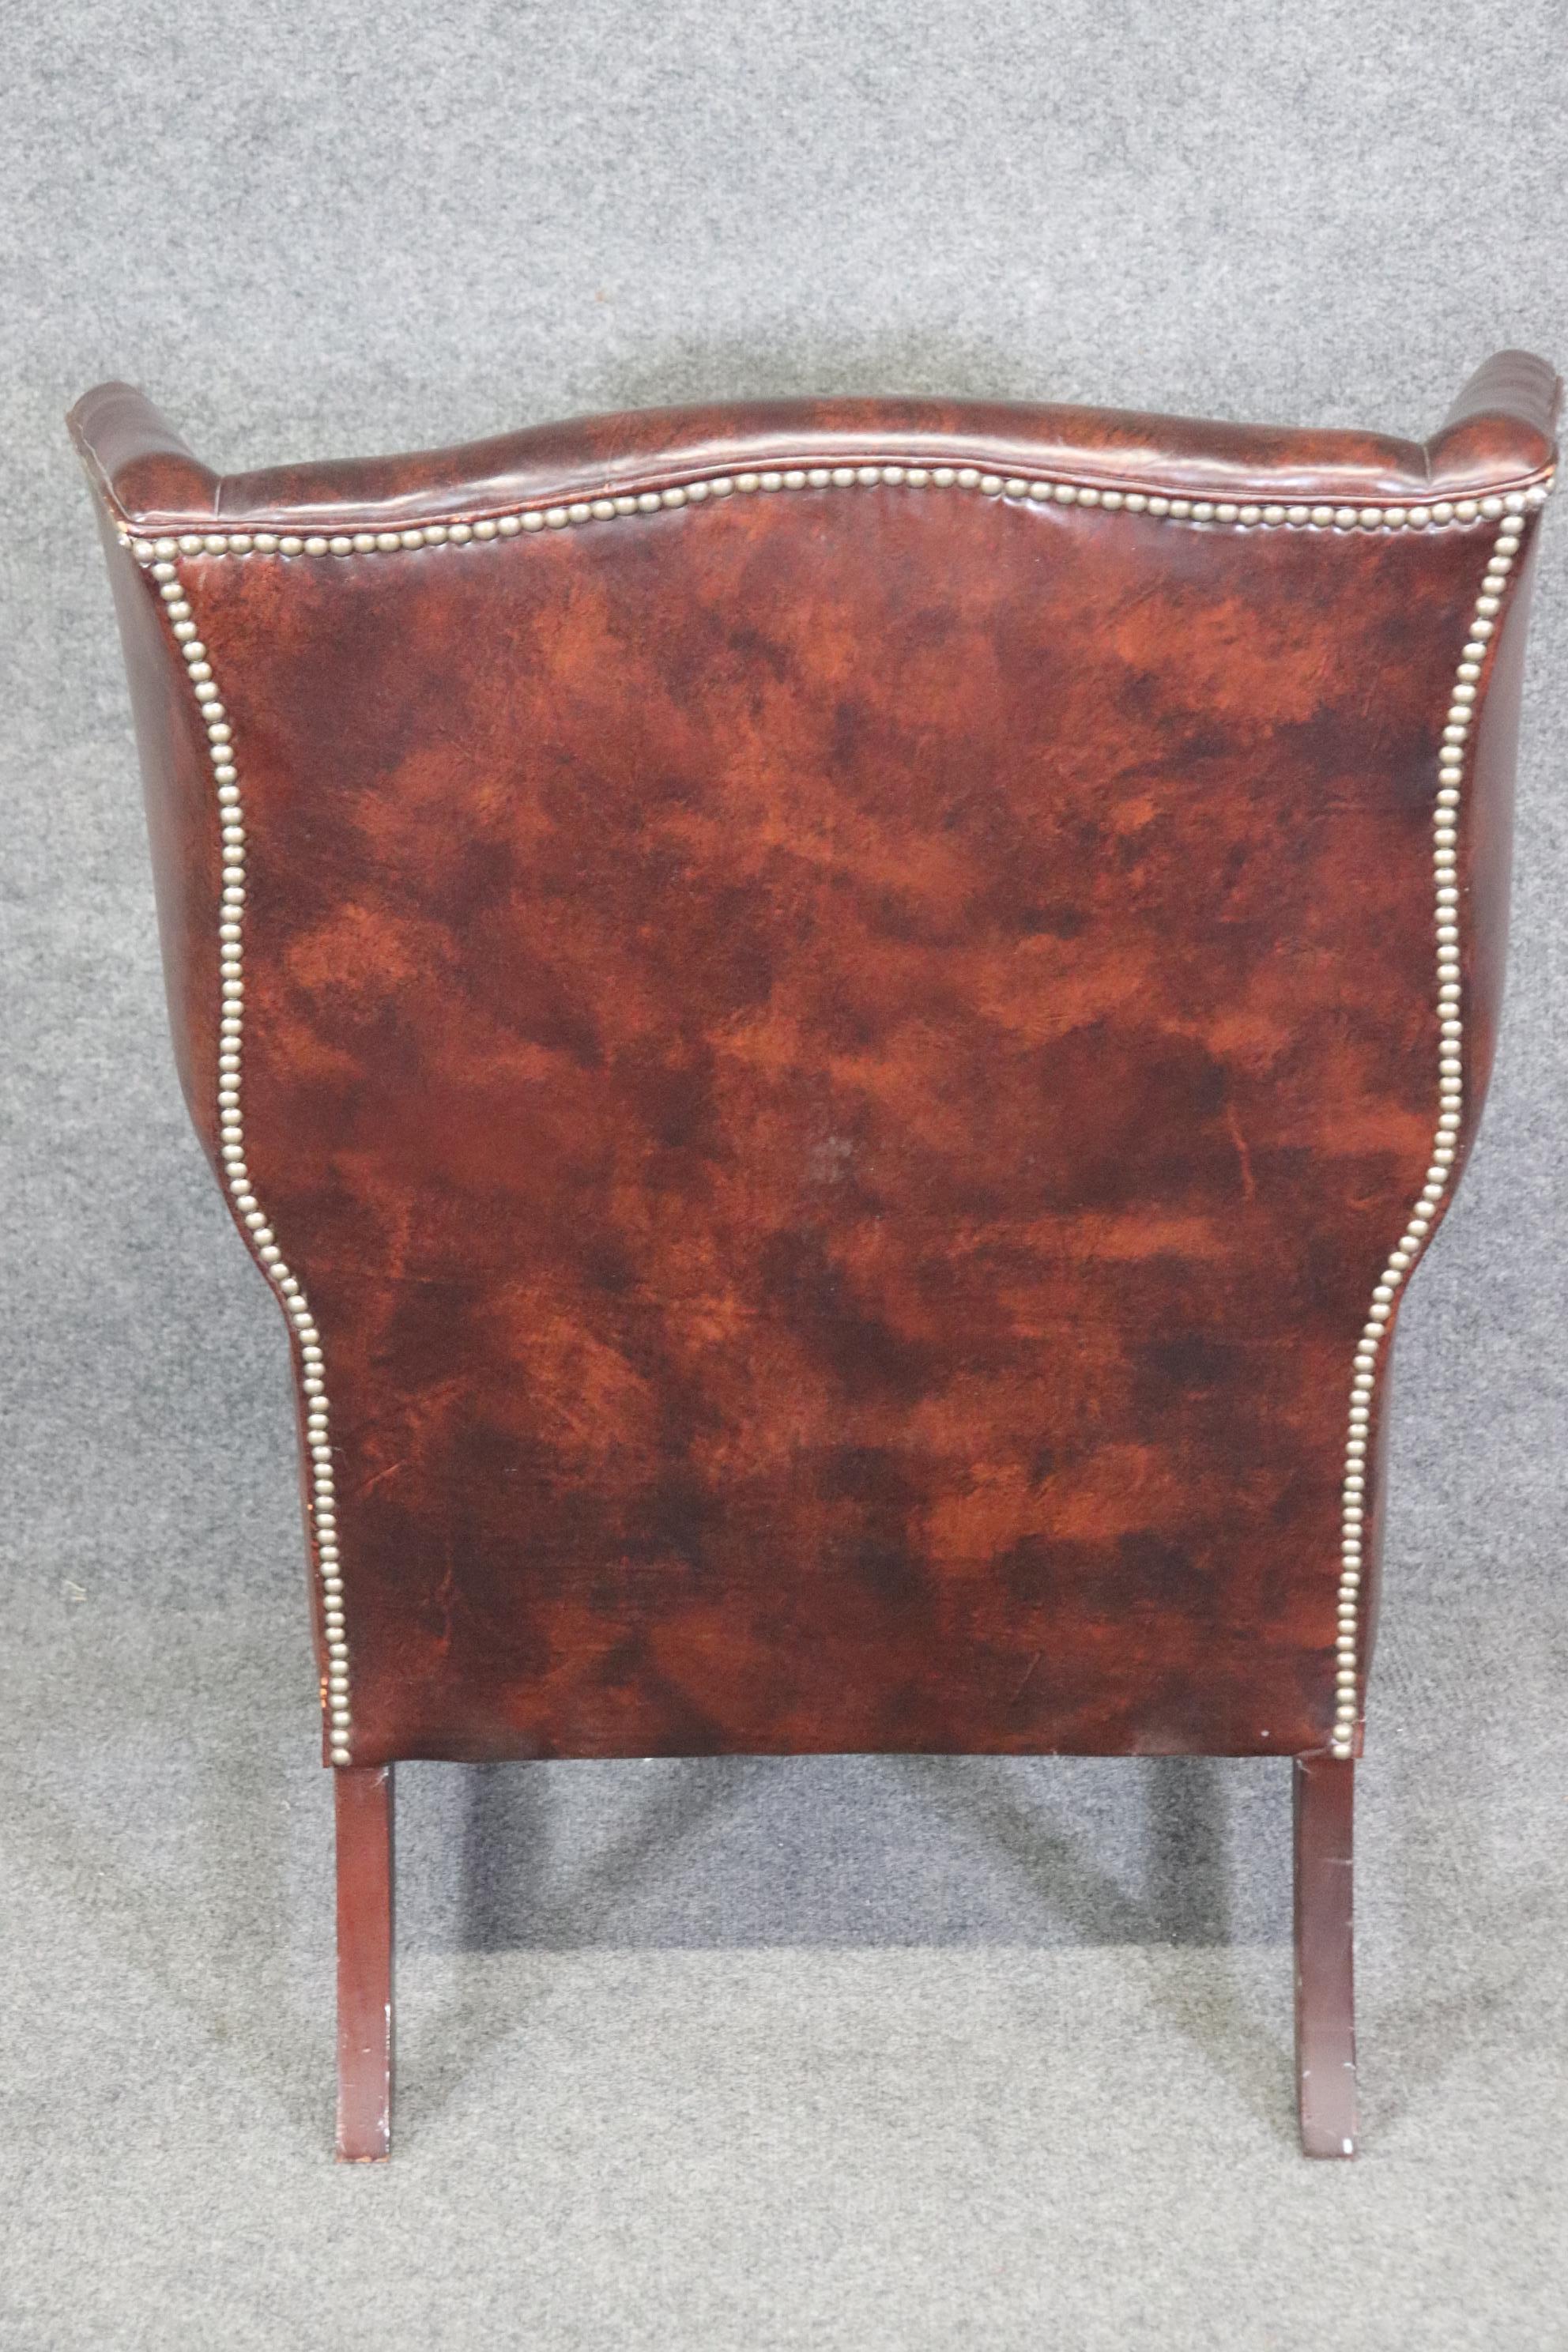 American Classic Leather Antique Patinated Brown Genuine Leather Chippendale Armchair